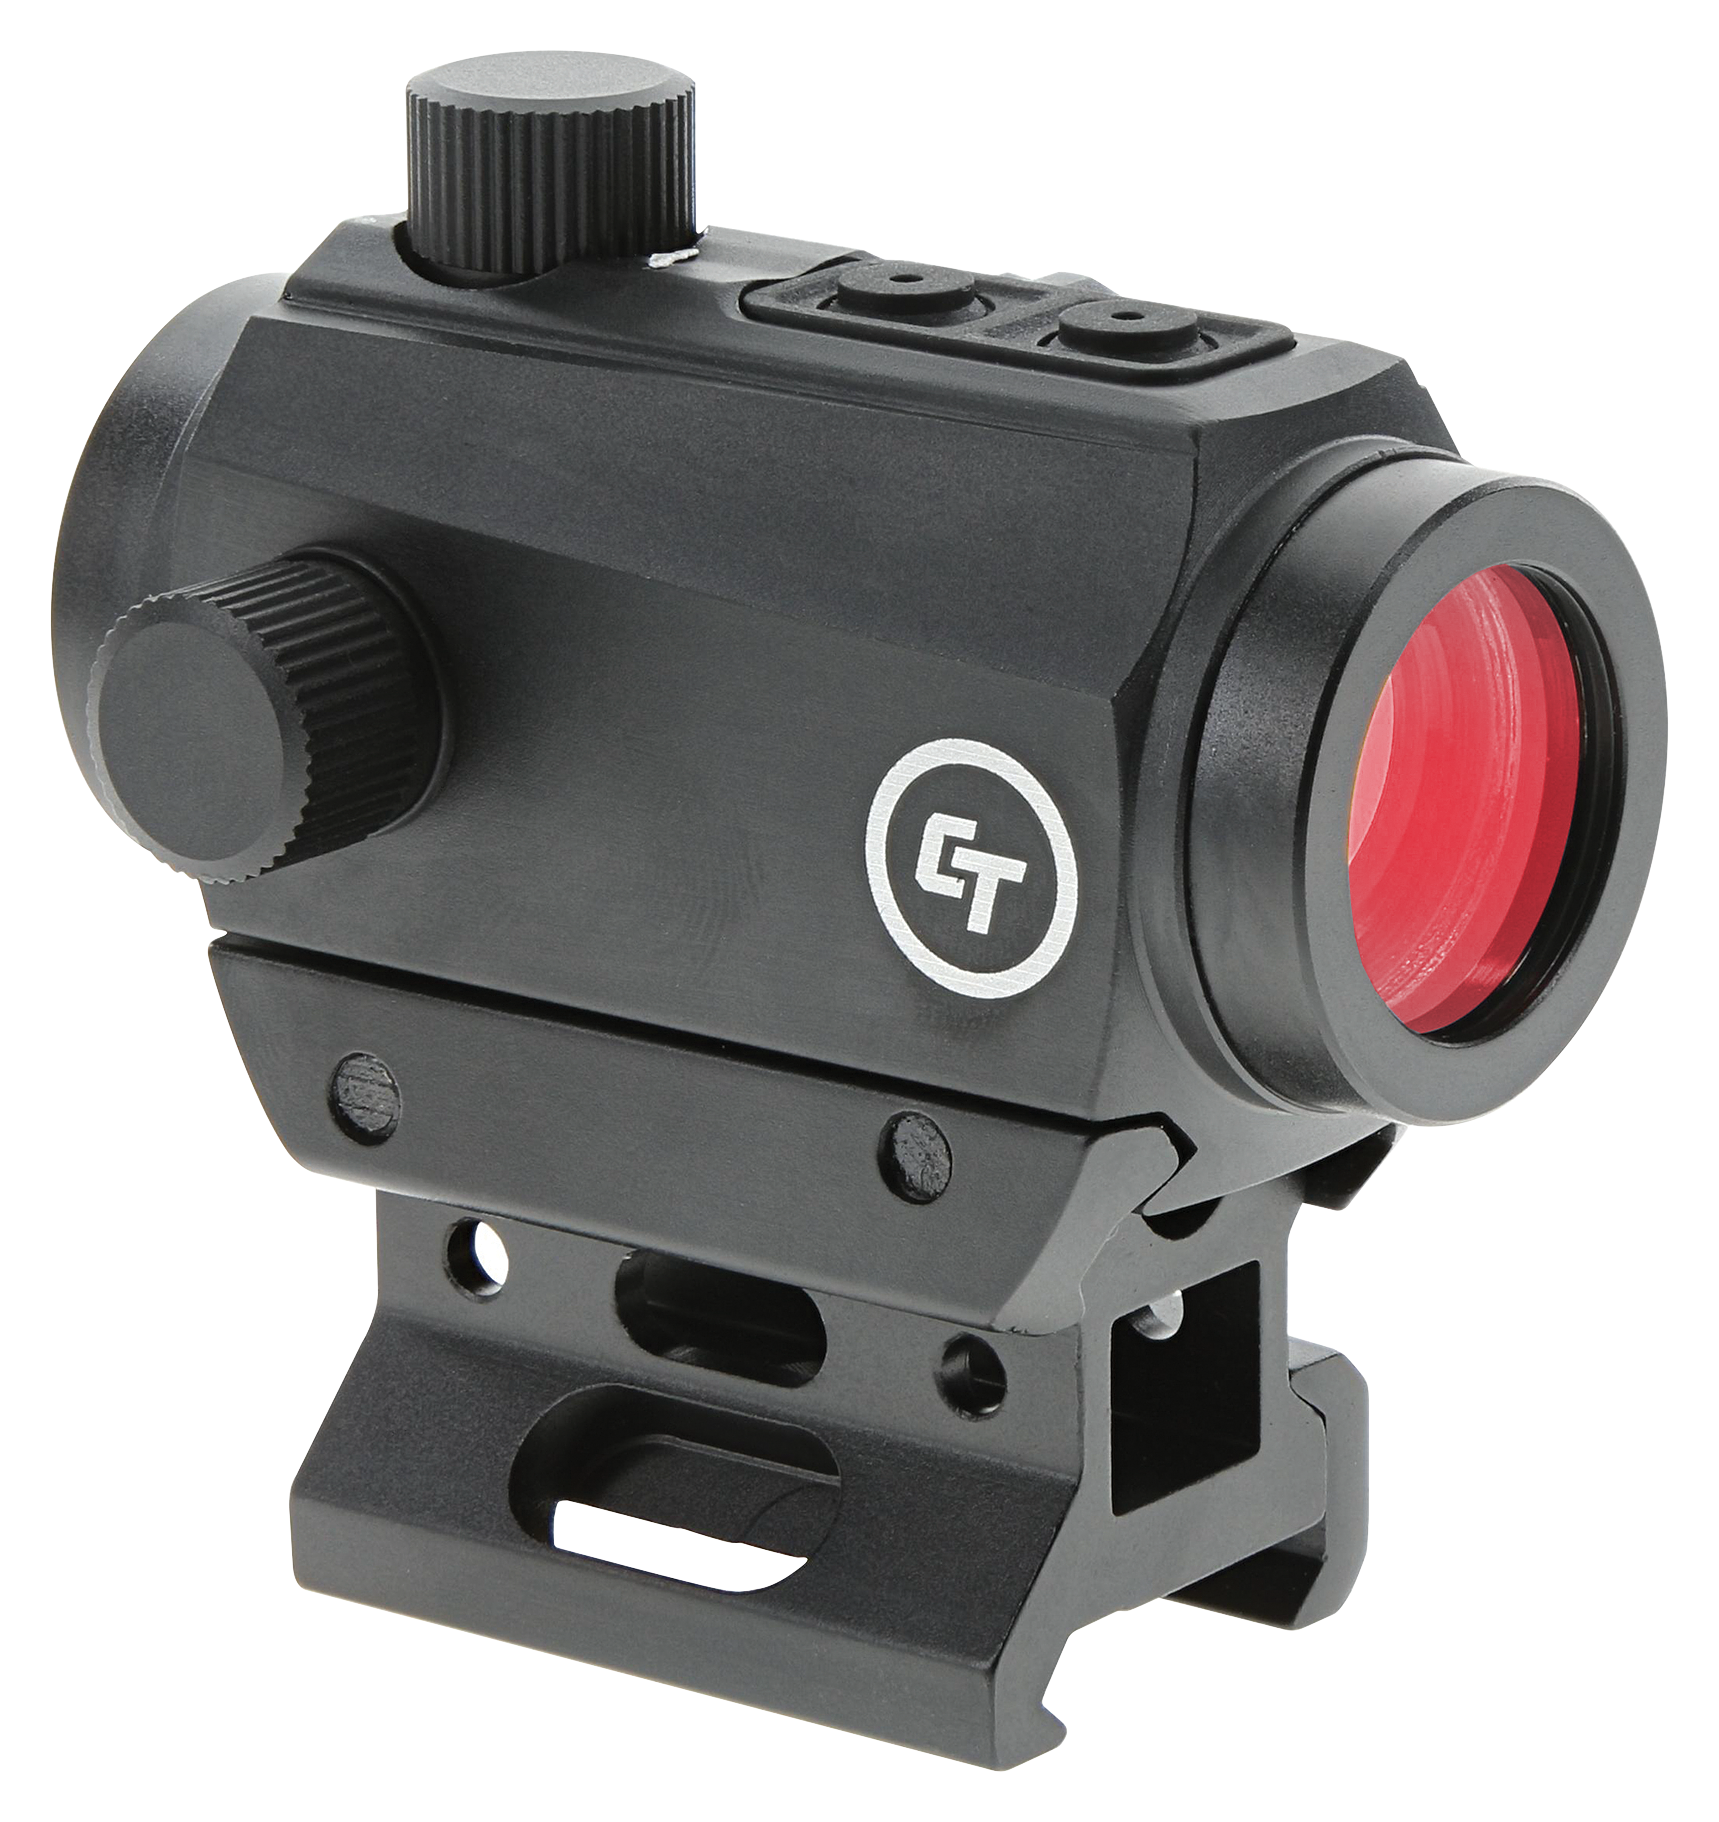 Crimson Trace CTS-25 Compact Red Dot Sight